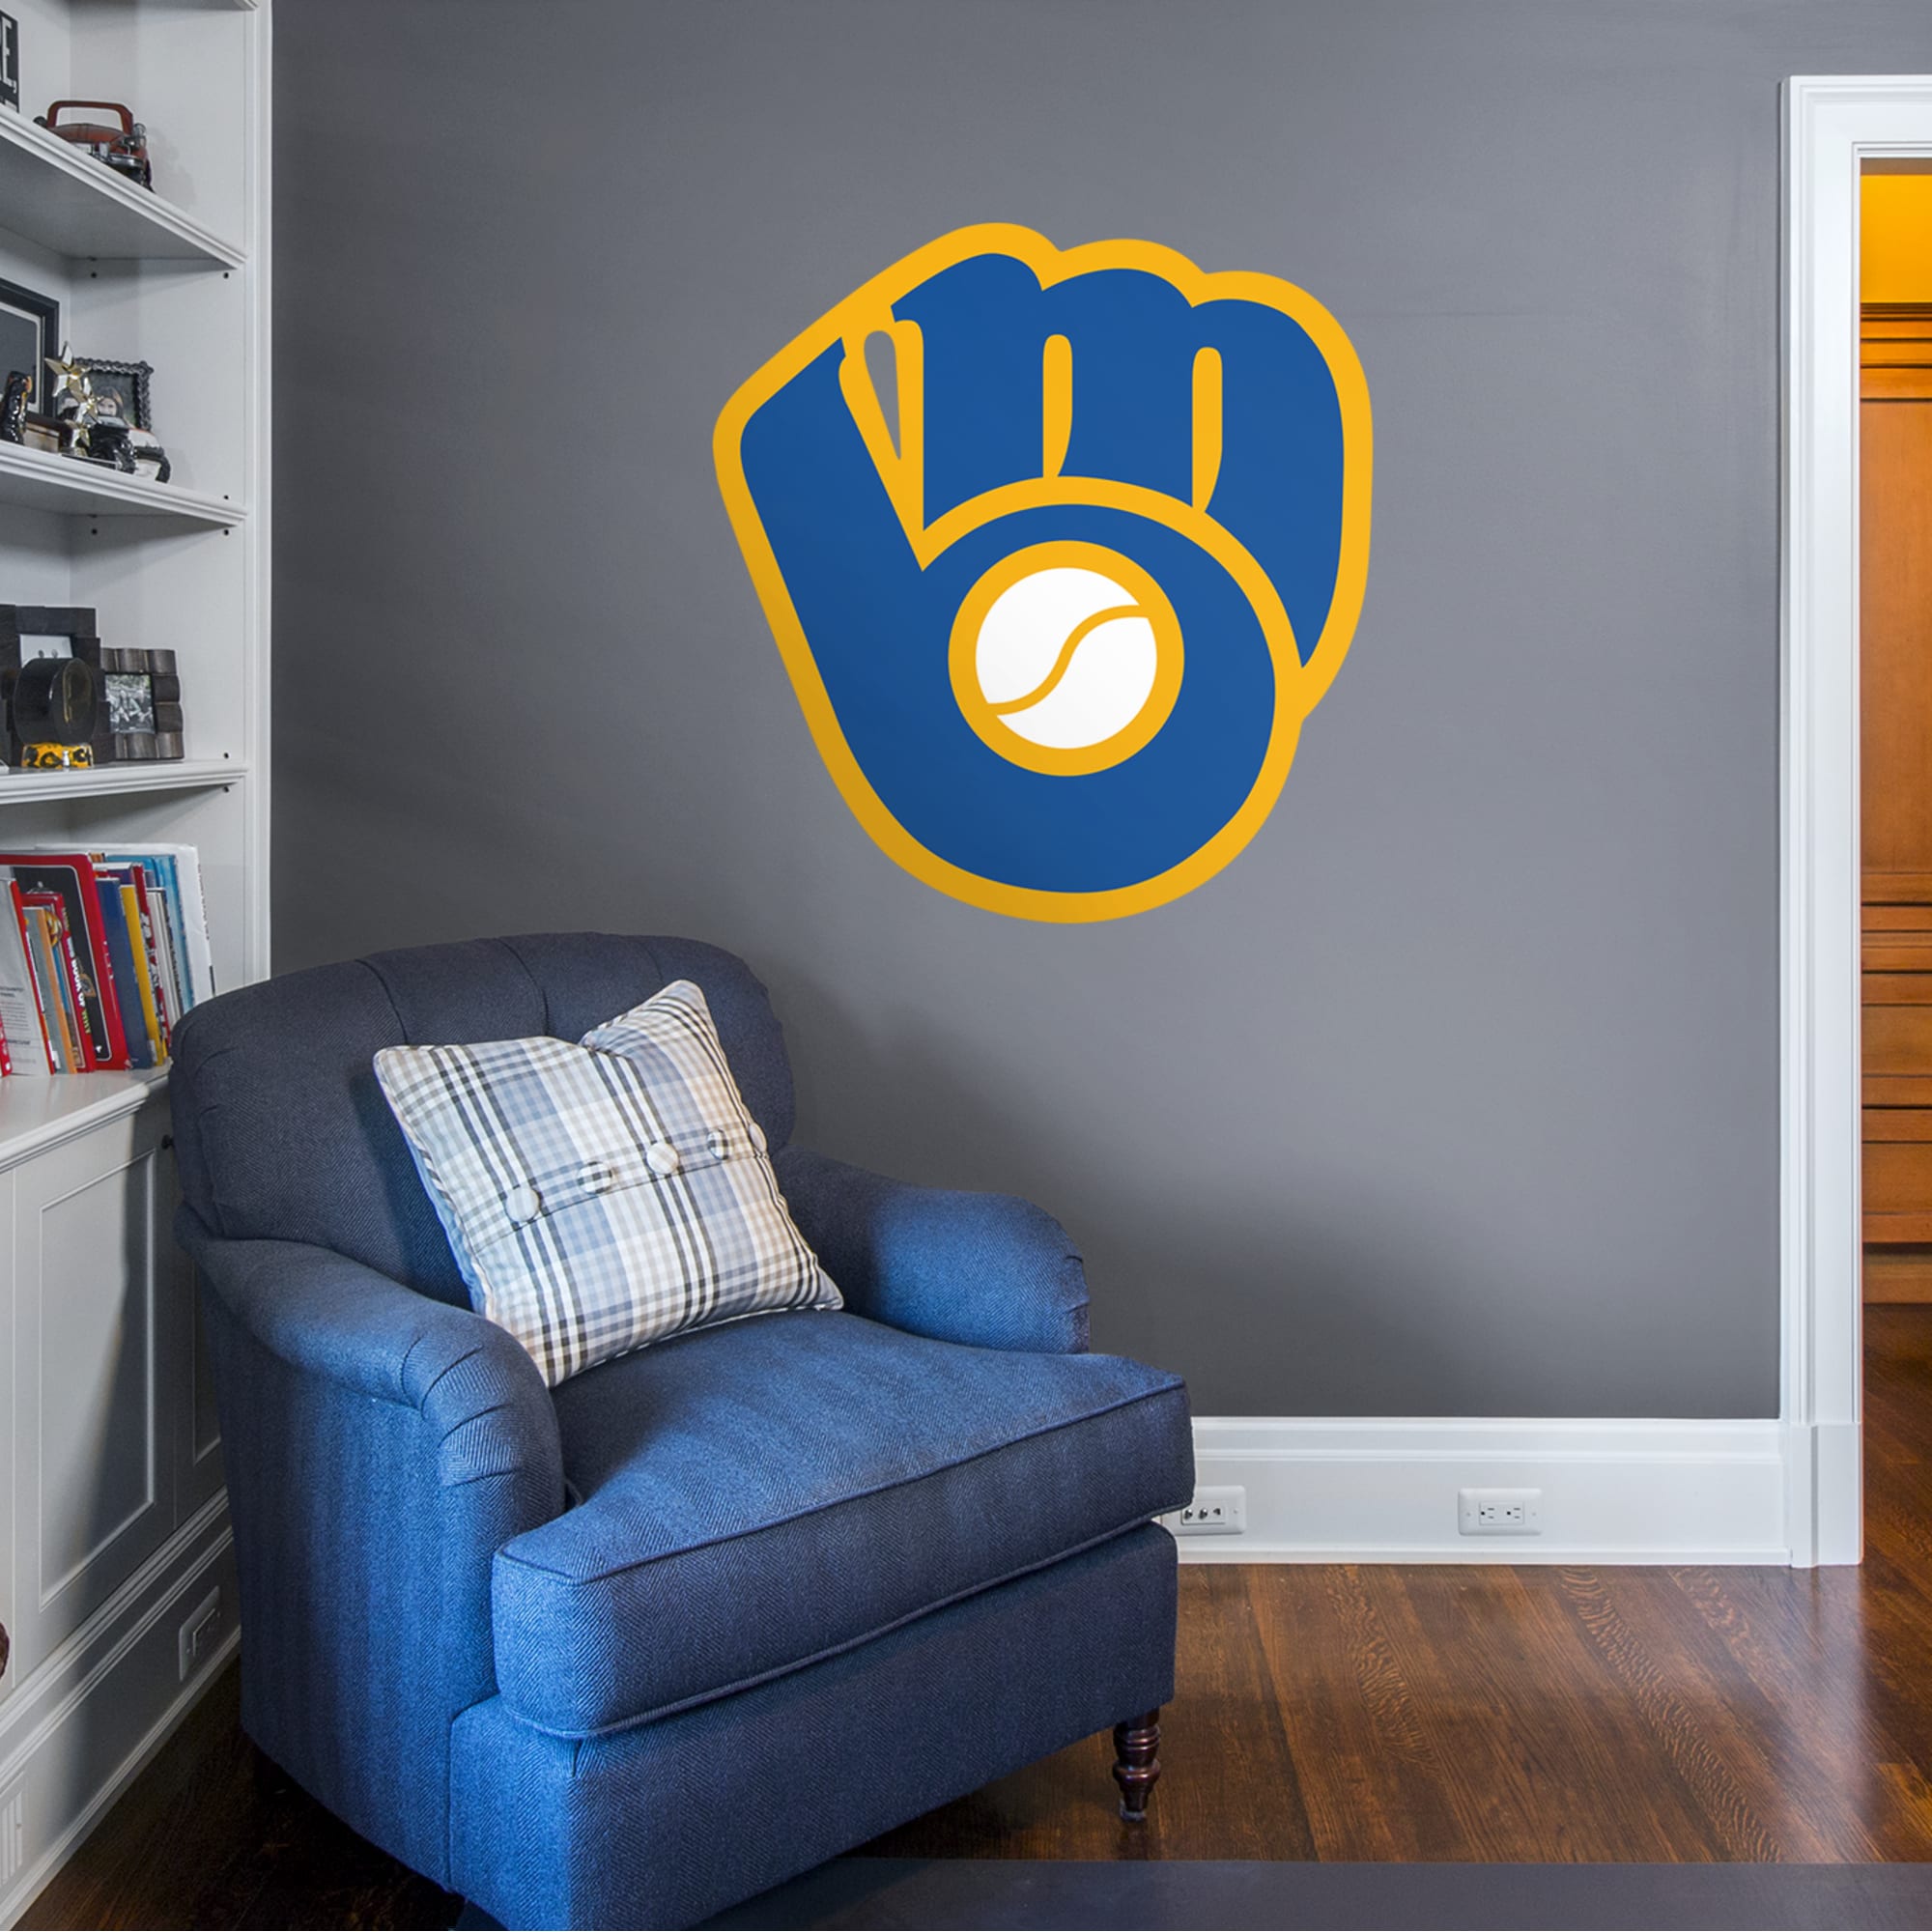 Milwaukee Brewers: Classic Logo - Officially Licensed MLB Removable Wall Decal Giant Logo (38"W x 41"H) by Fathead | Vinyl